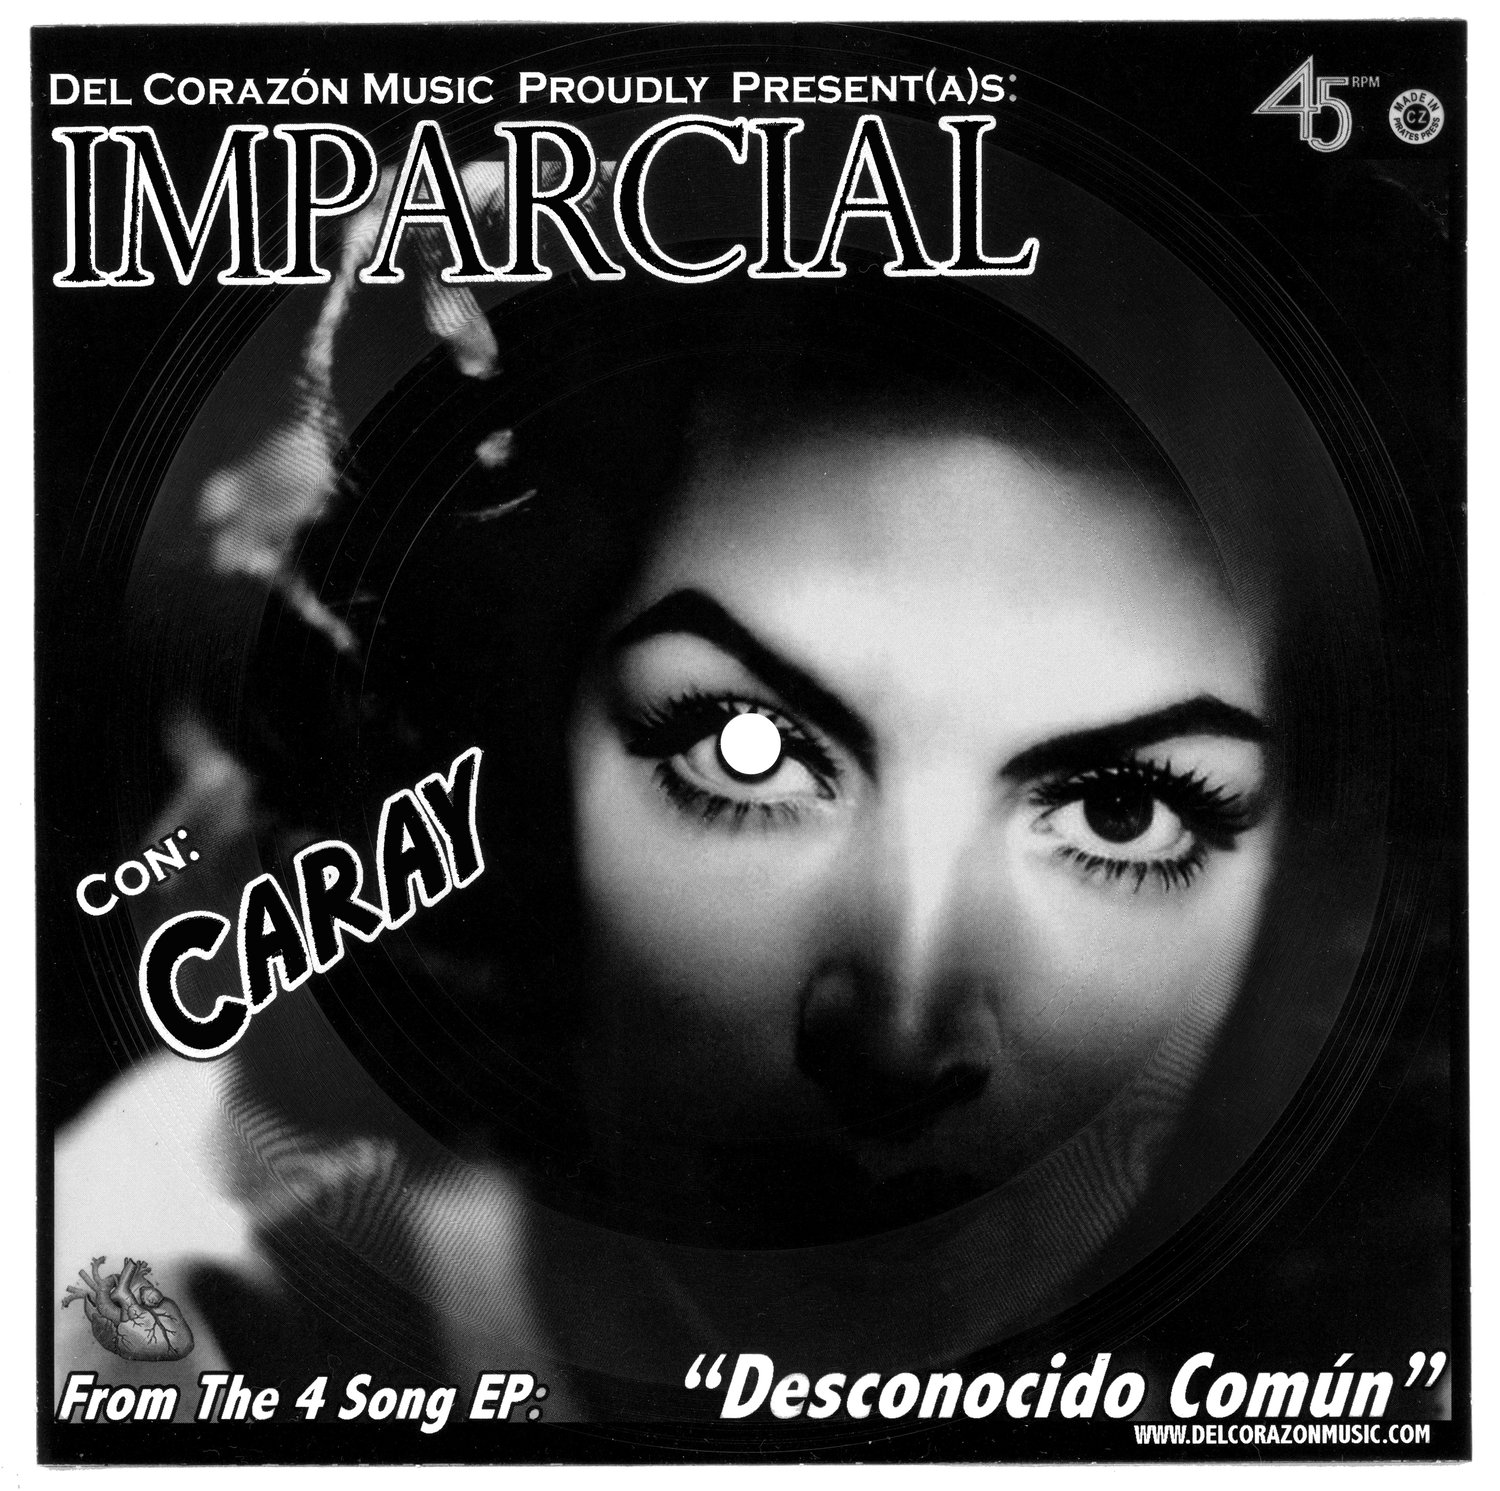 Image of Imparcial - (45rpm) - Flexi Single: "Caray"